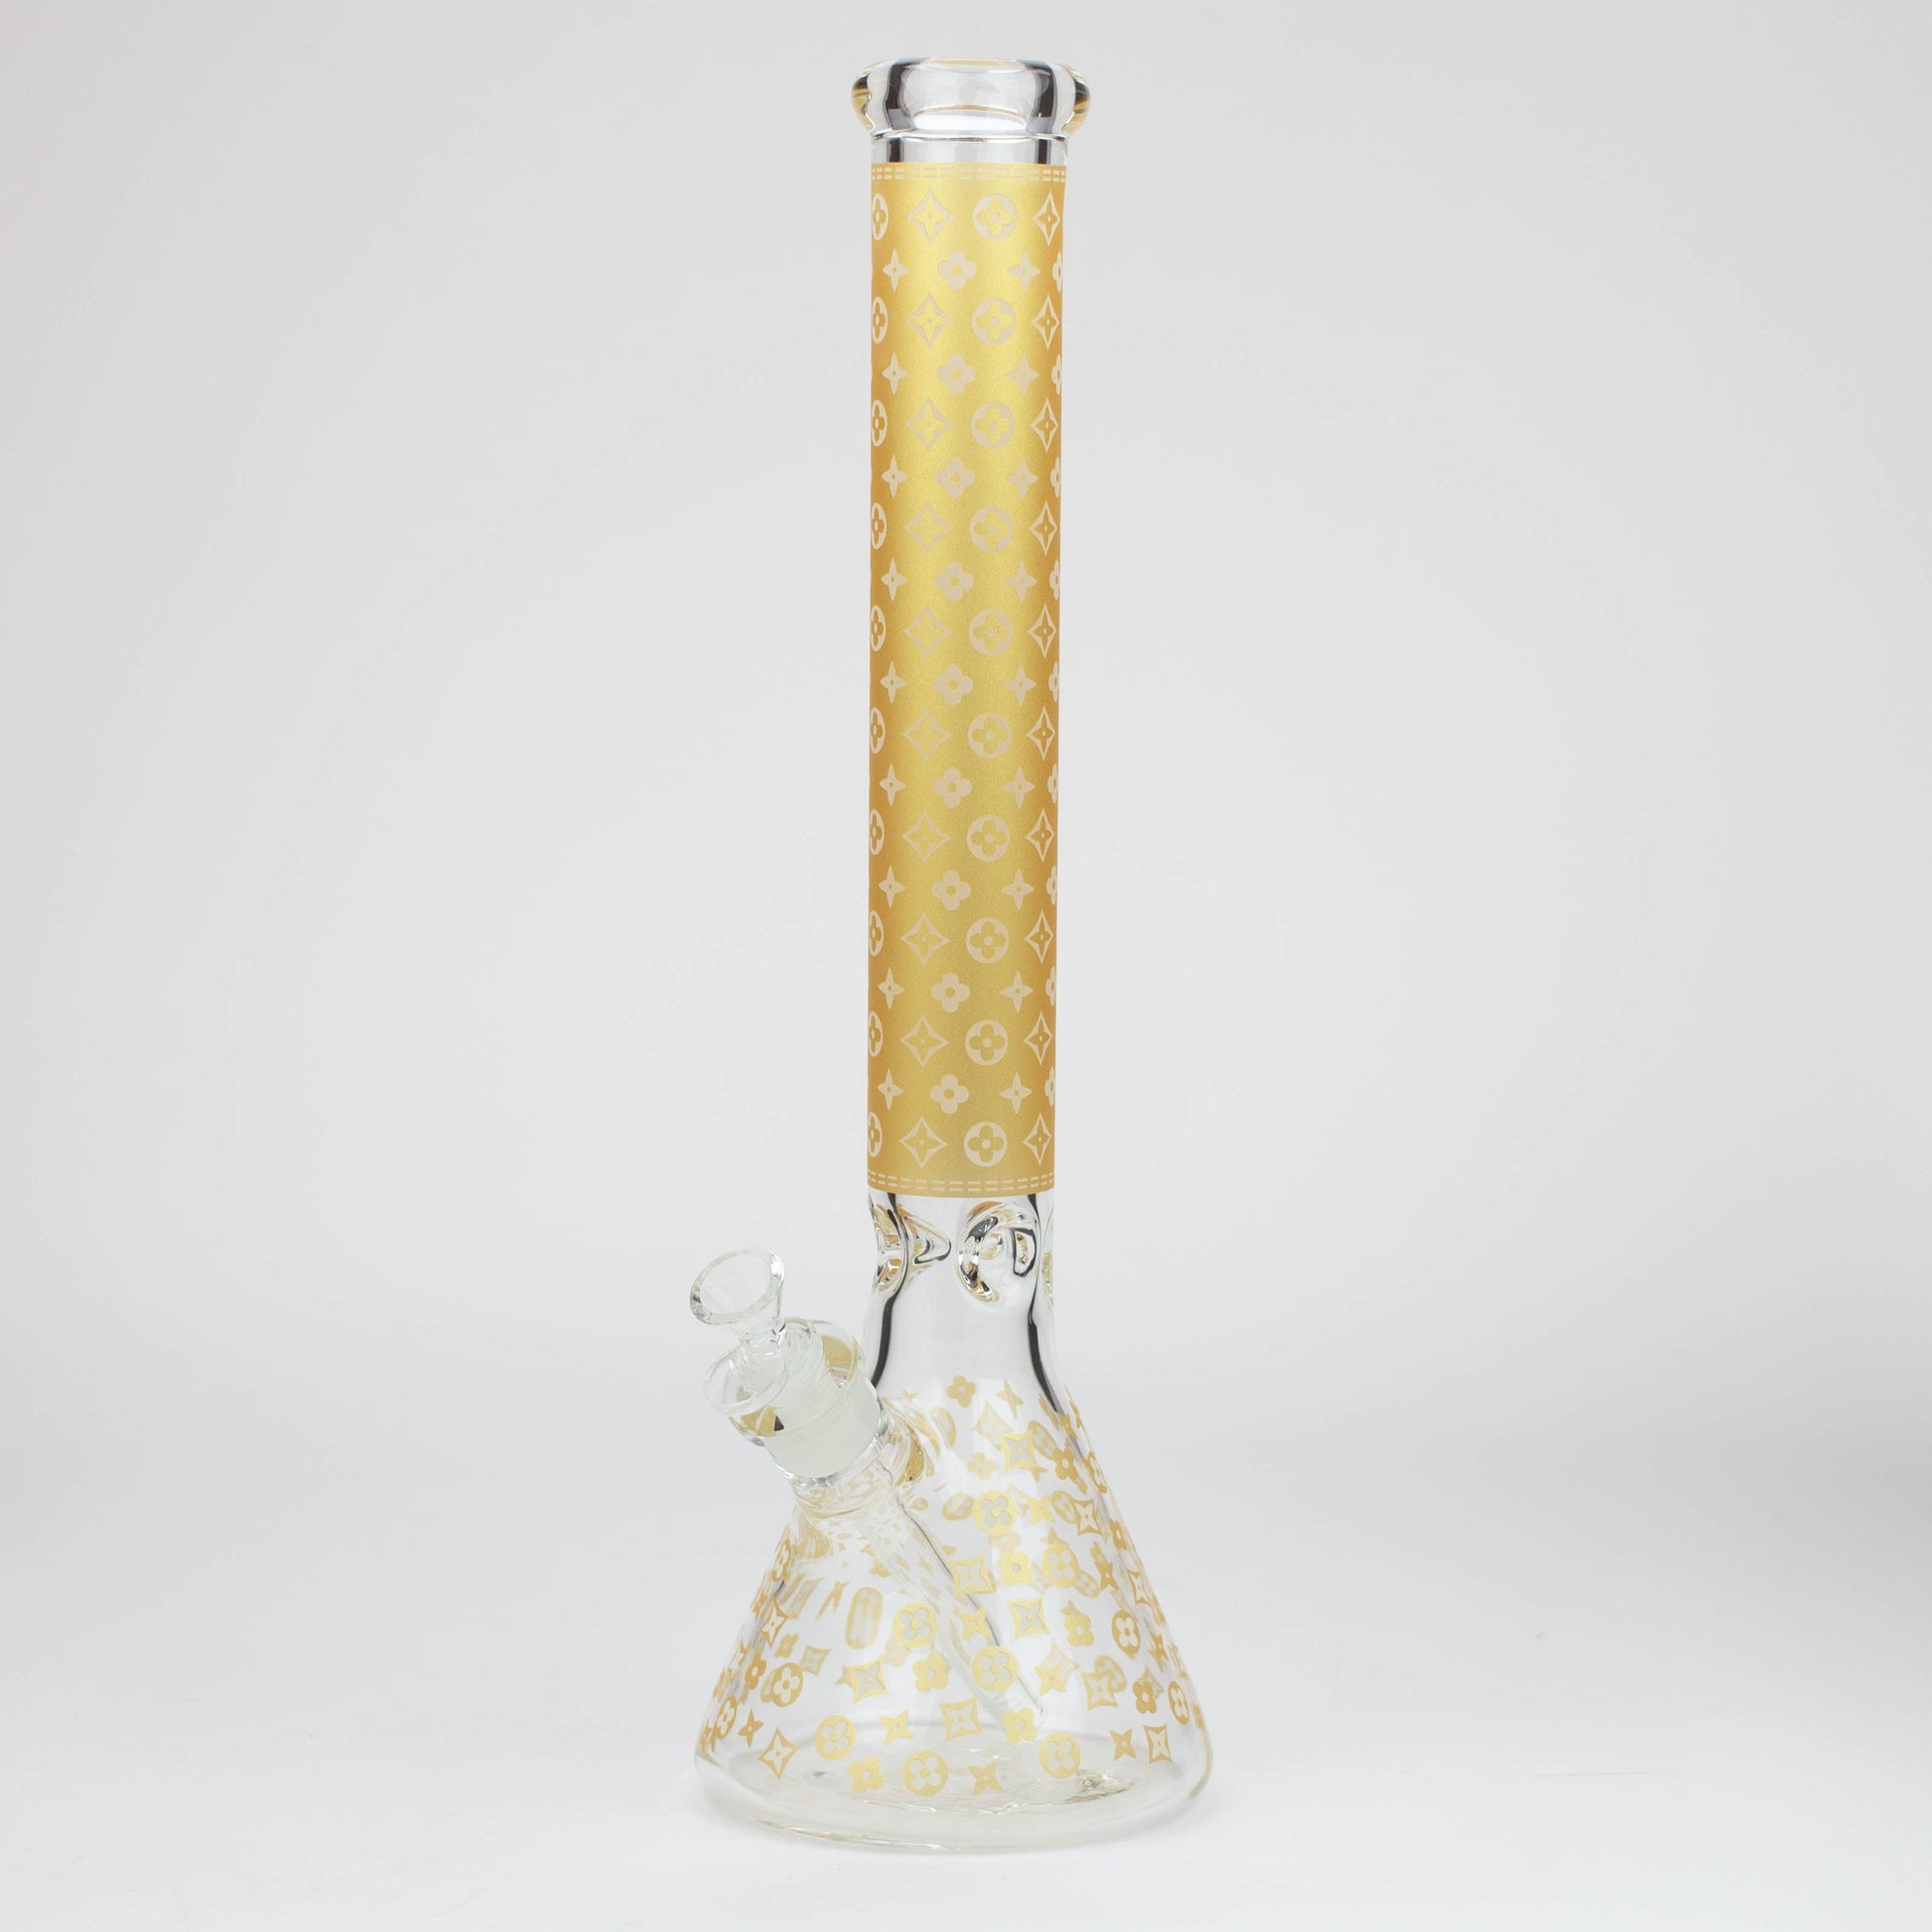 18" LV Glow in the dark 7 mm glass water bong_6